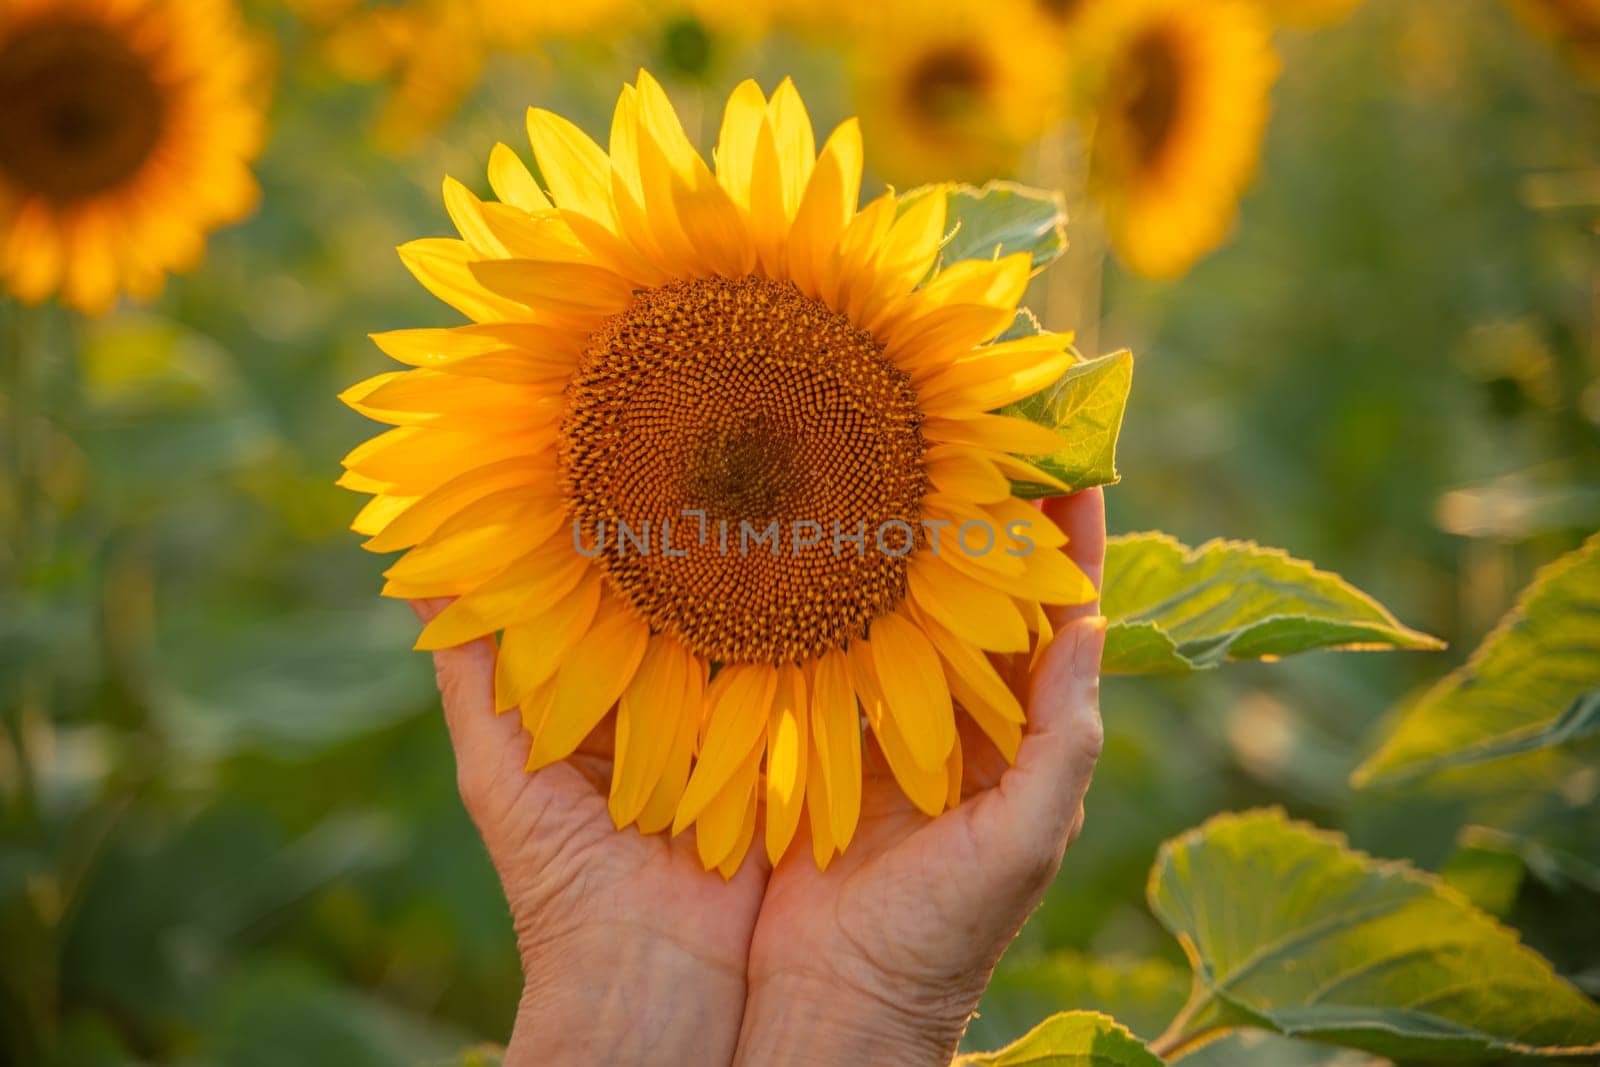 Female hands holding sunflower flower against the backdrop of a sunflower field at sunset light. Concept agriculture oil production growing sunflower seeds for oil by Matiunina